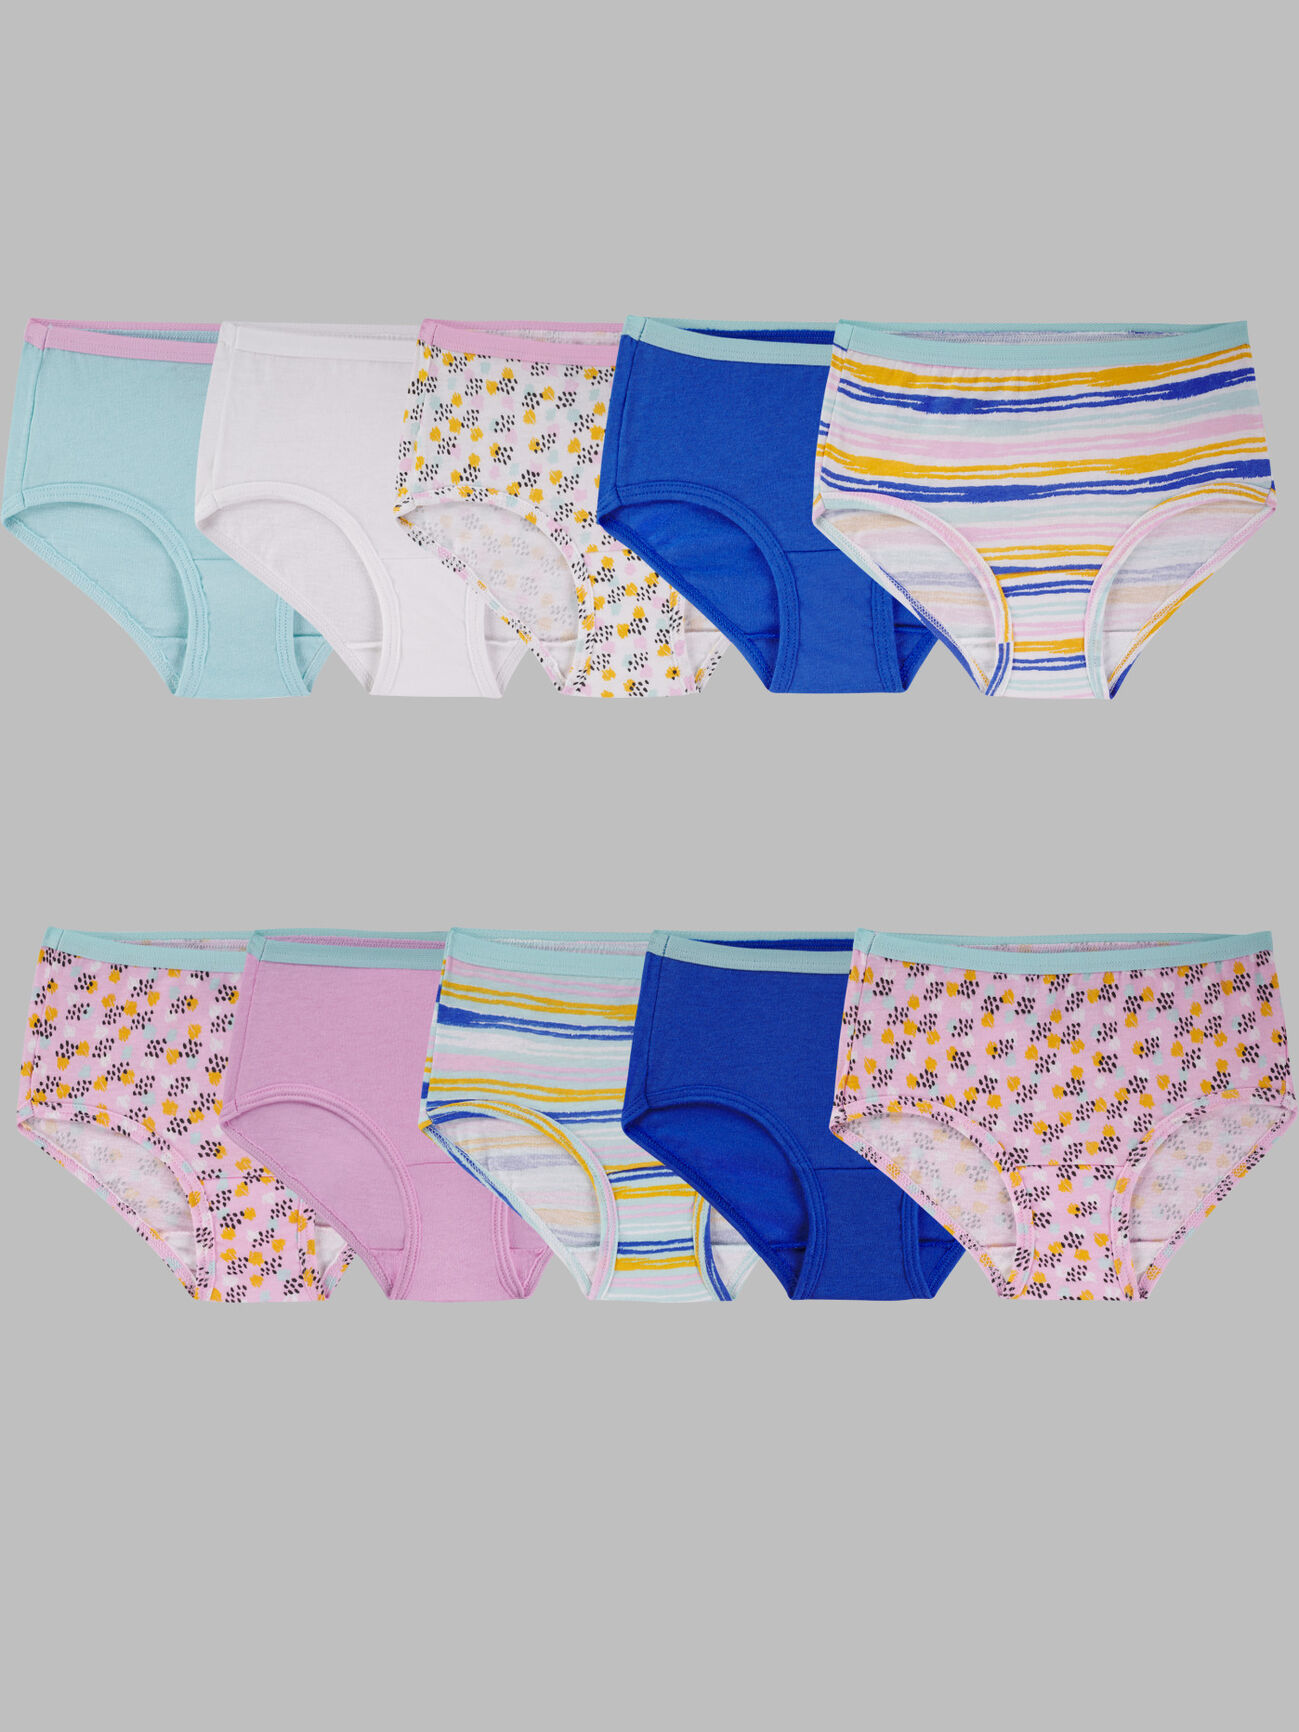 Cotton Women Printed Underwear, Size: OS, Packaging Type: Packet